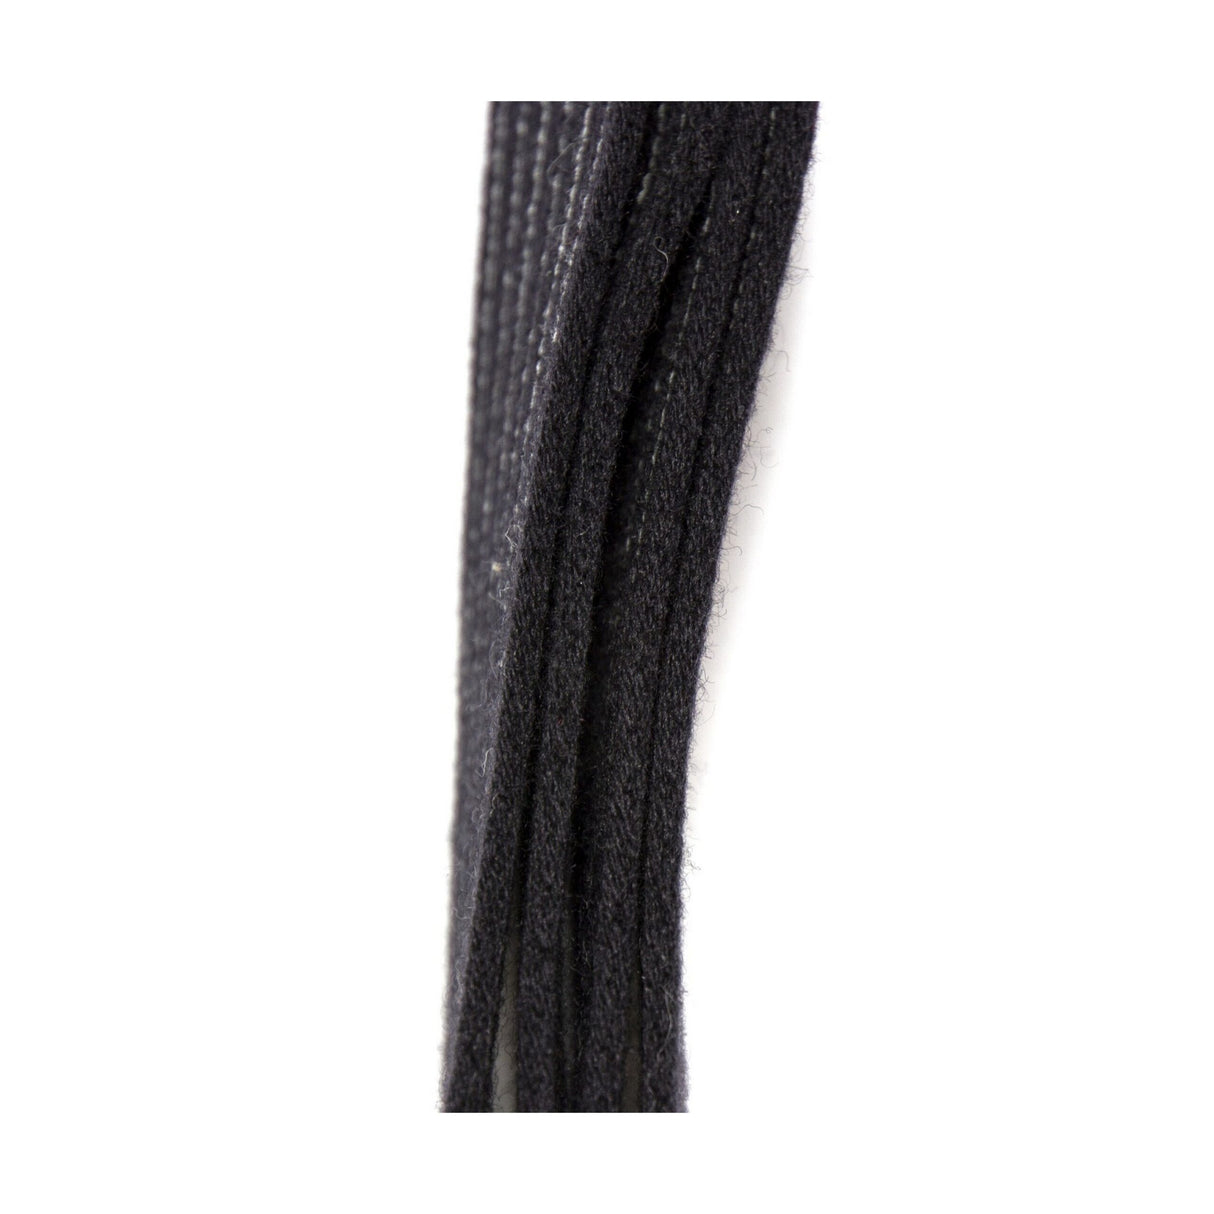 Reunion Blues RBS-28PS Merino Wool Guitar Strap, Black, White Pinstripe, with Classic Black Leather Tab